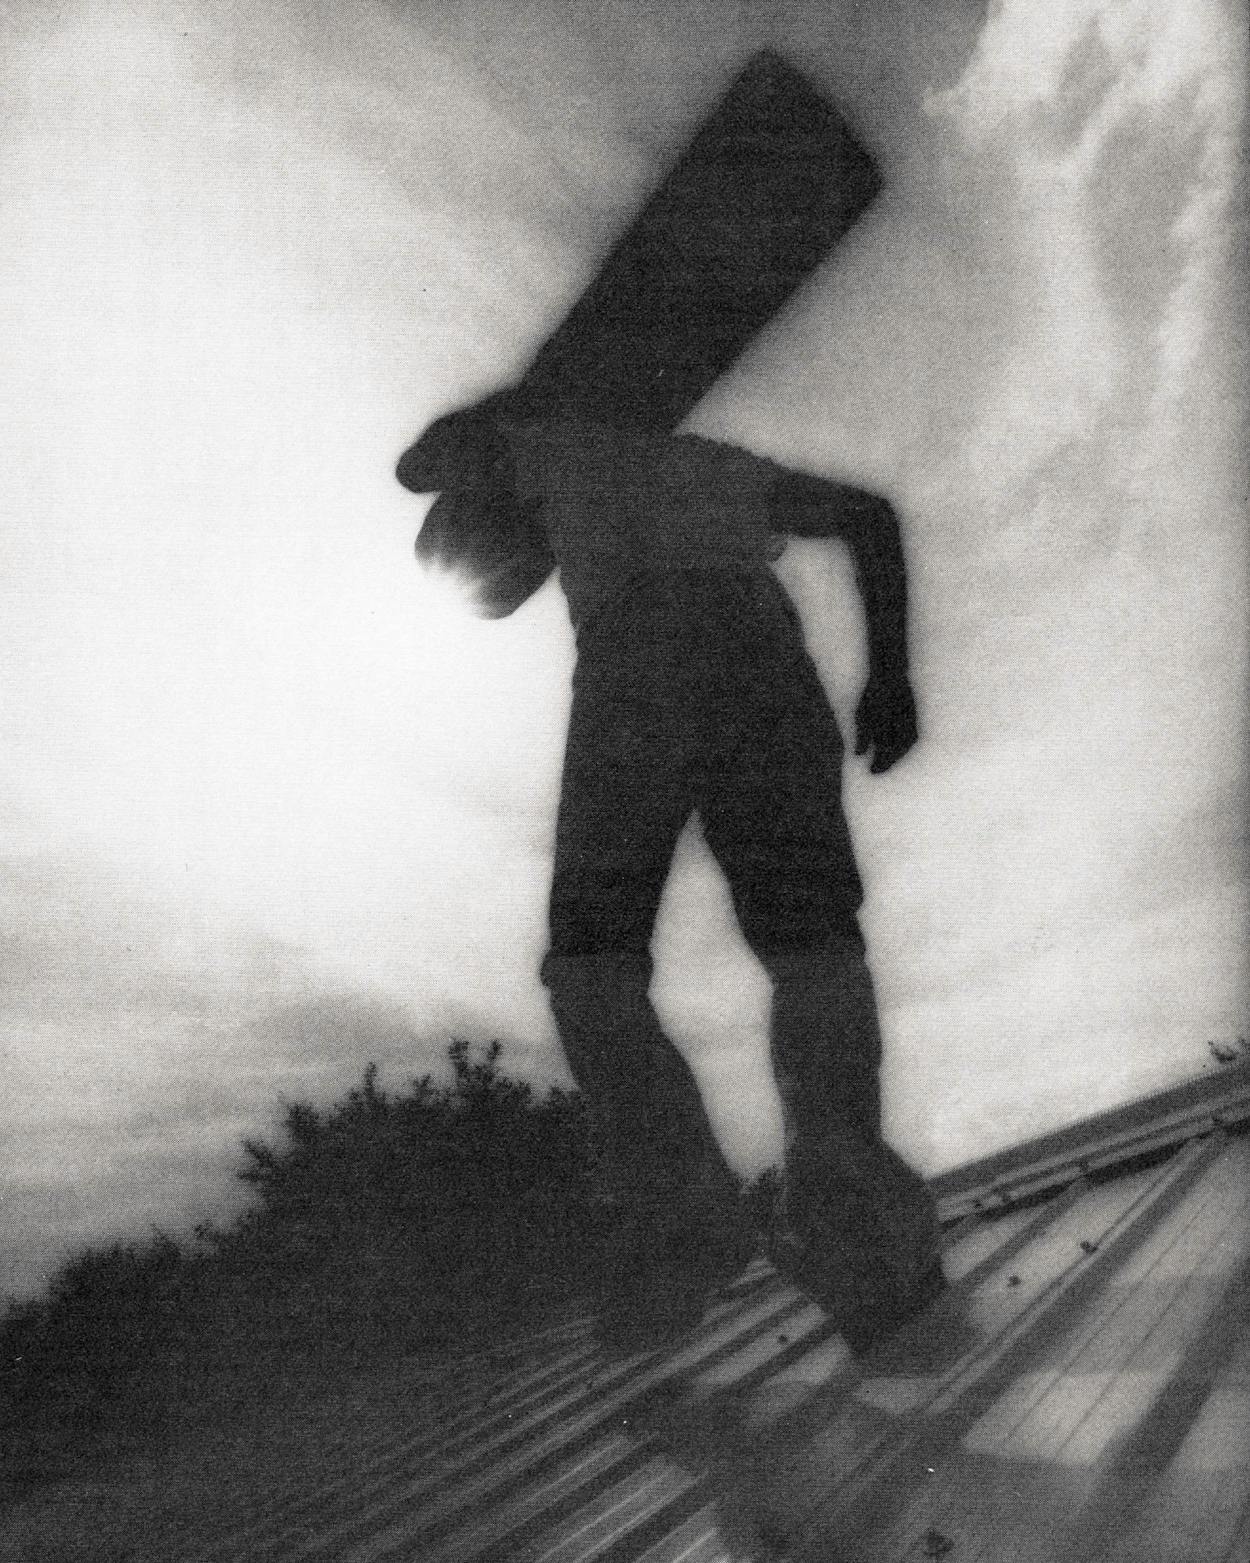 A man walks across a rooftop with a beam over his shoulder and his back to the camera.